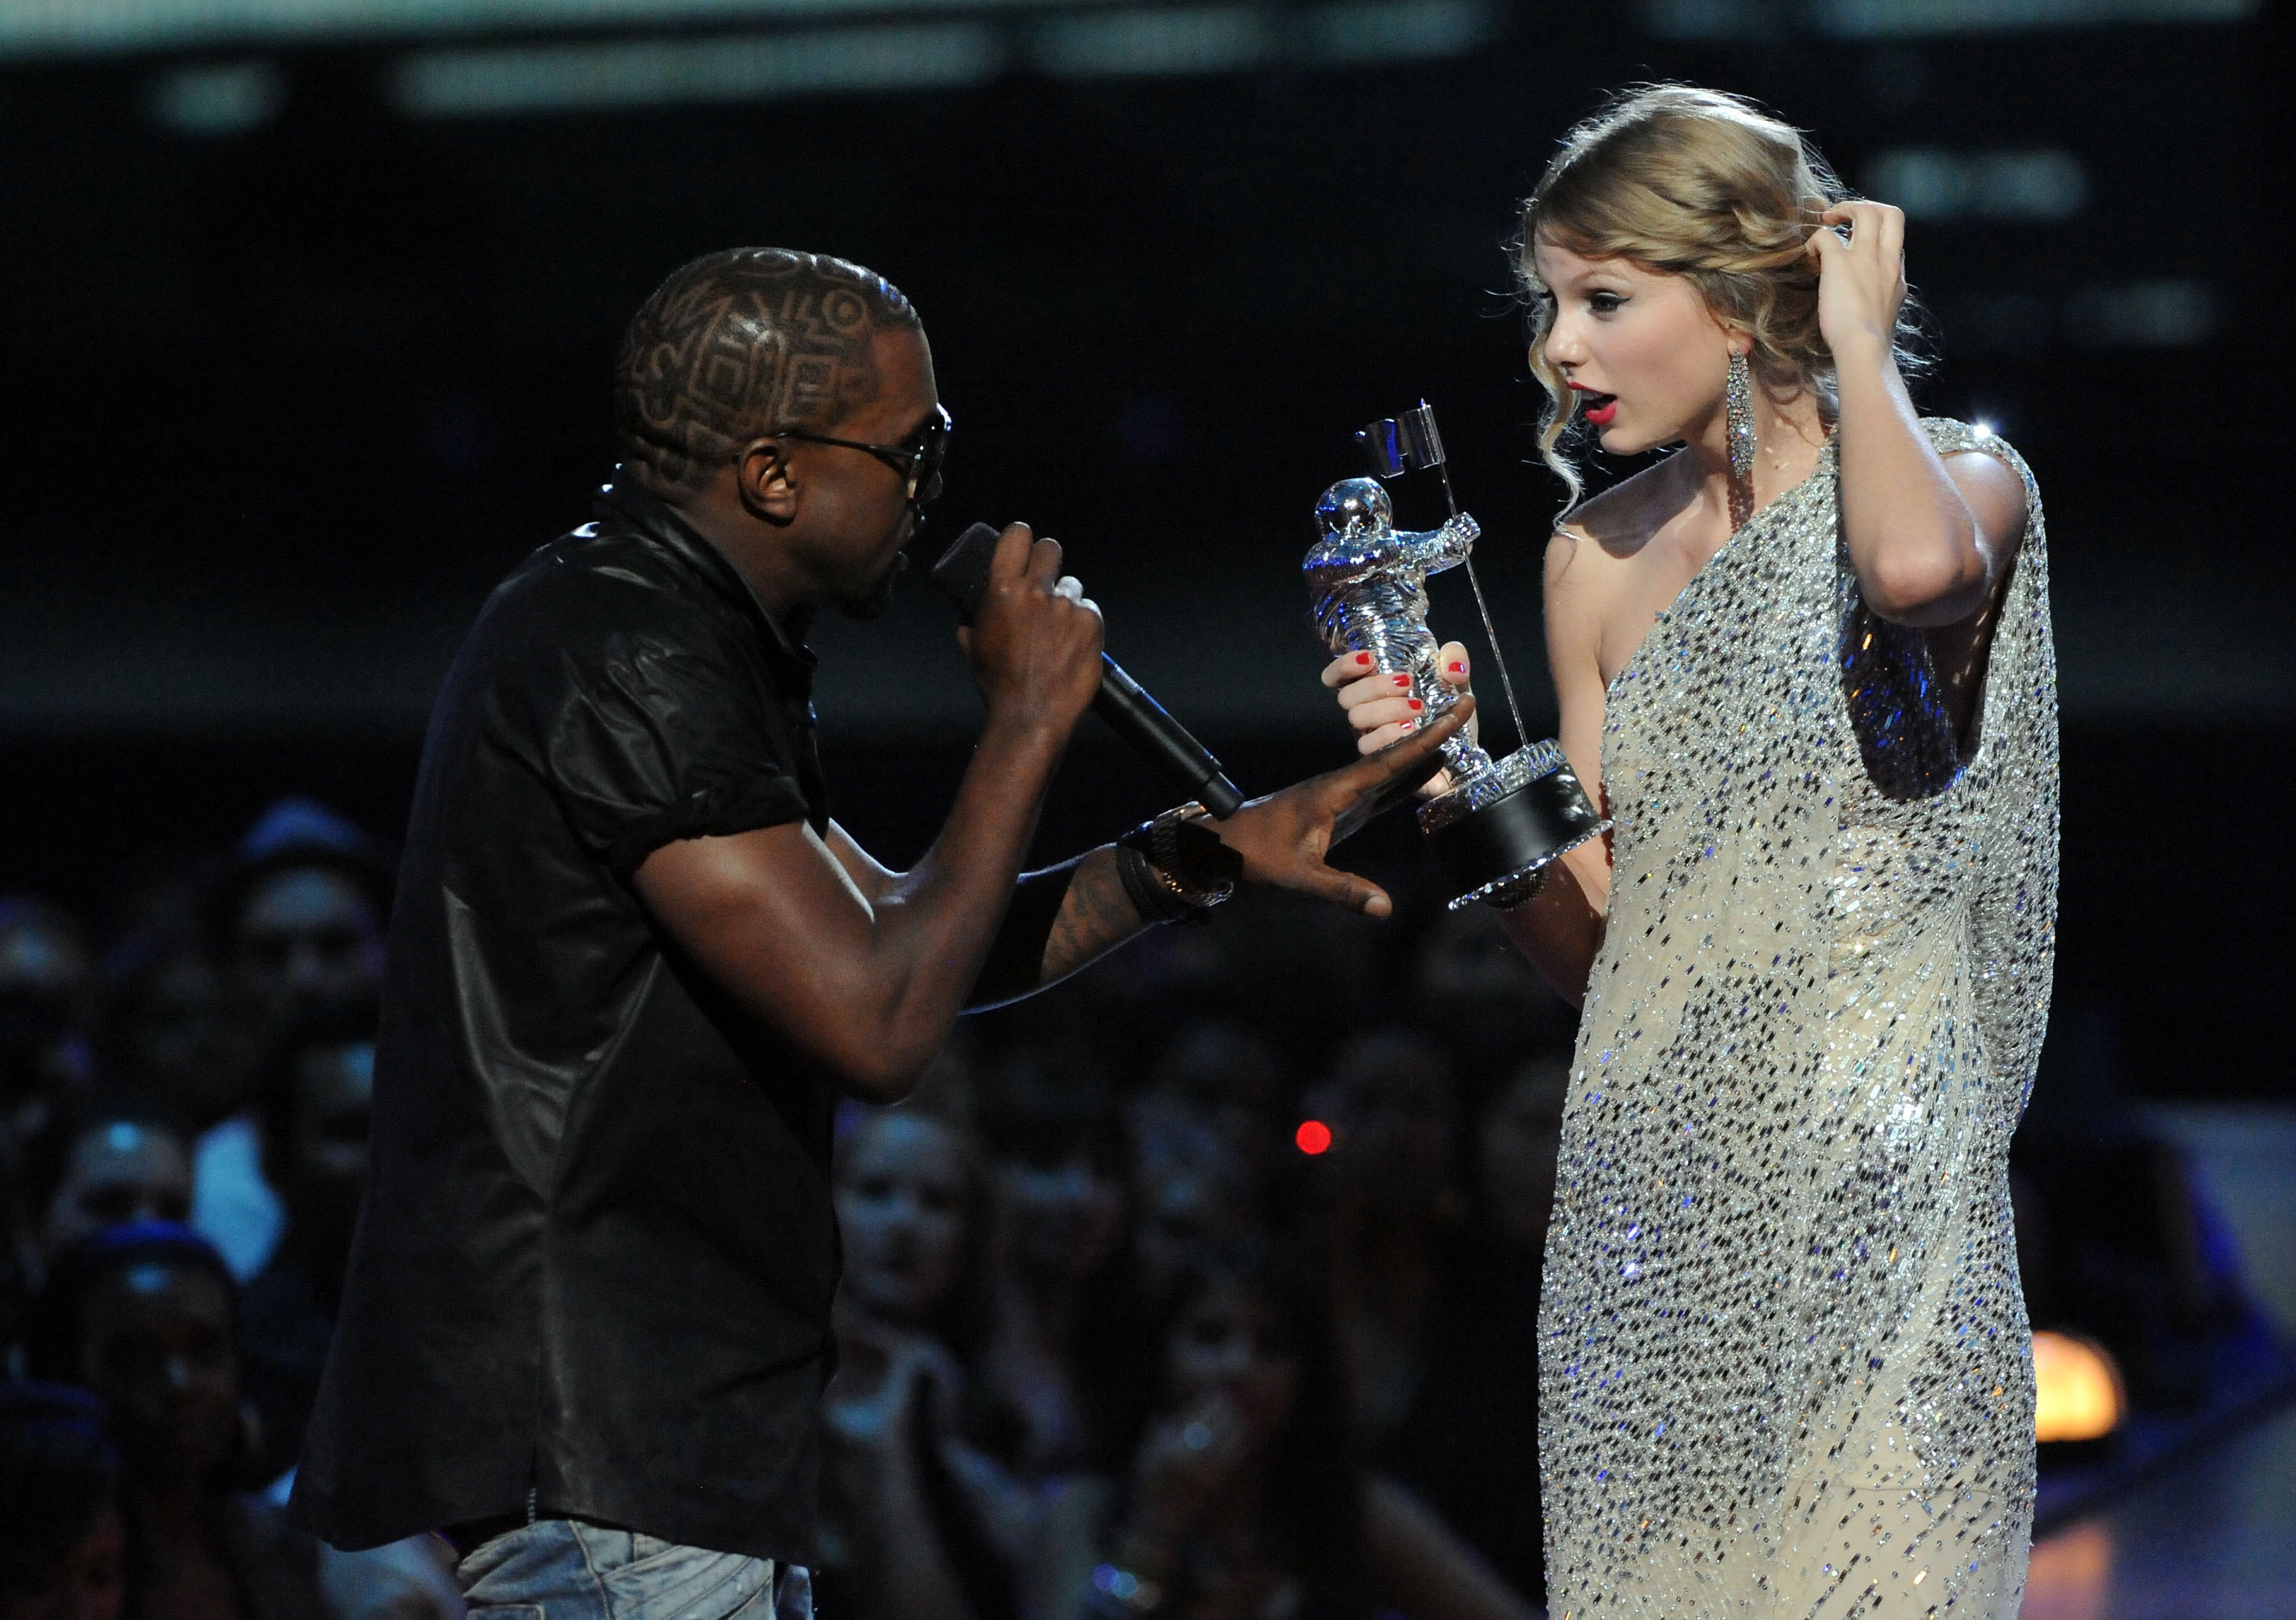 Kanye West jumps on stage as Taylor Swift accept award.